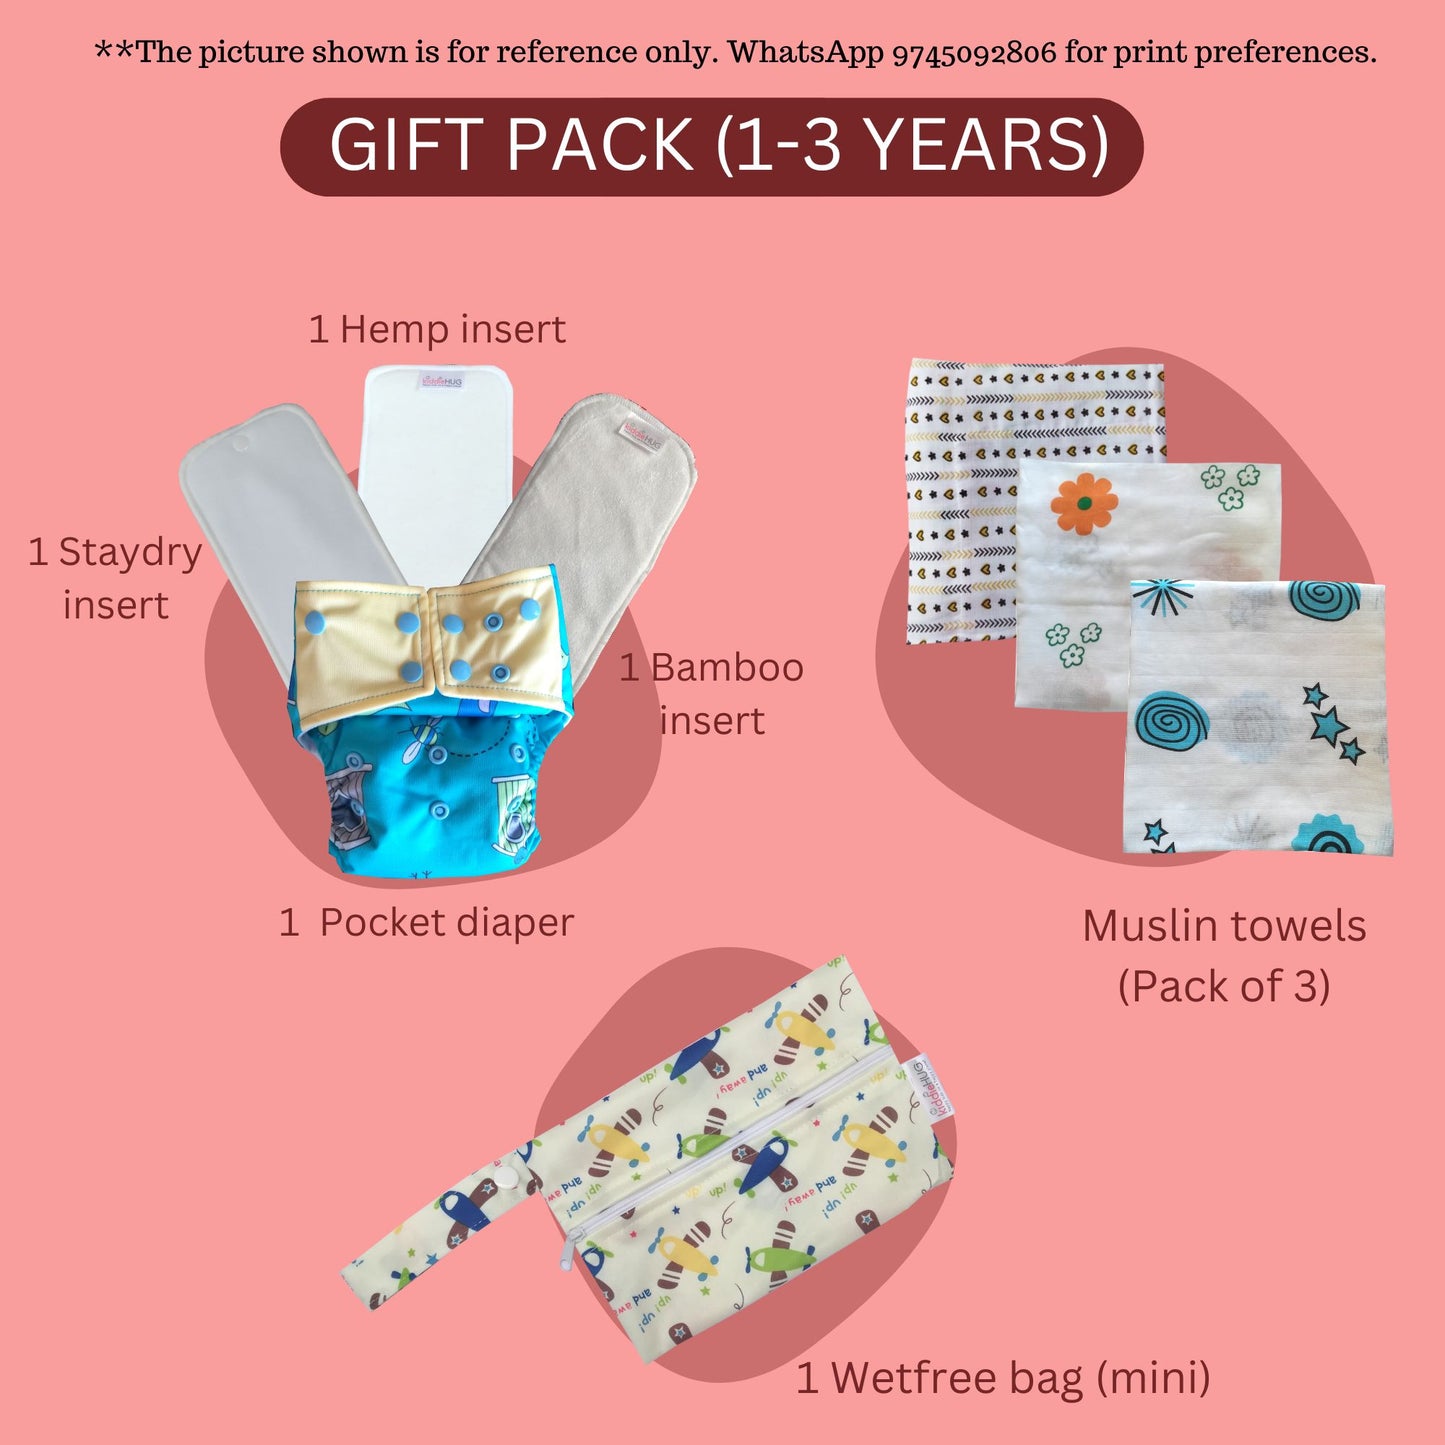 Diapering & Essentials Gift Pack